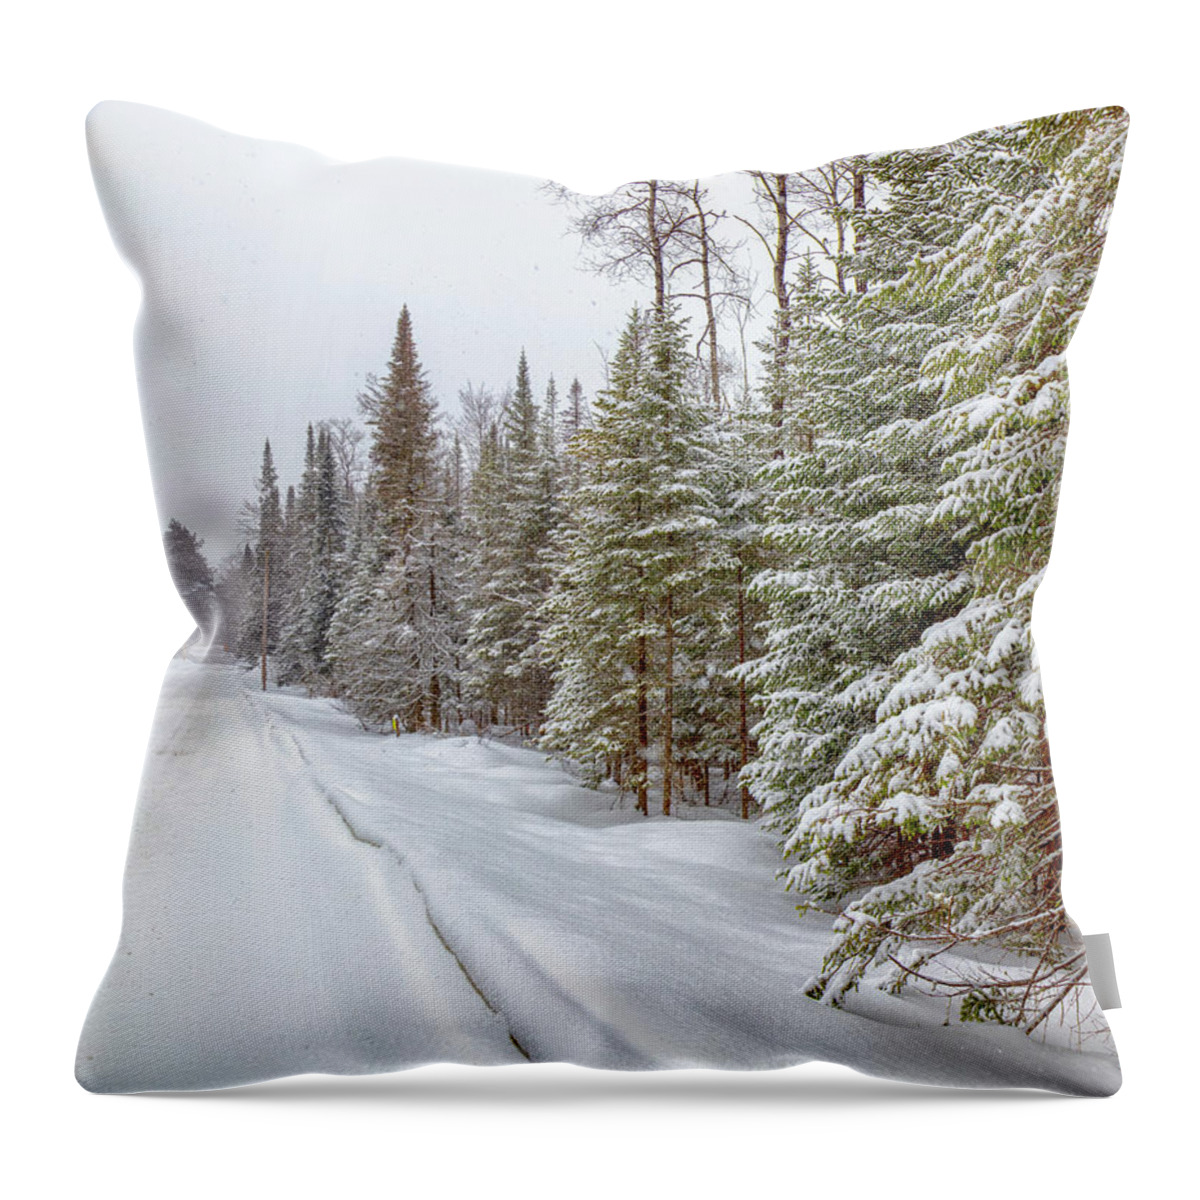 Pines Throw Pillow featuring the photograph Tug Hill Pines by Rod Best